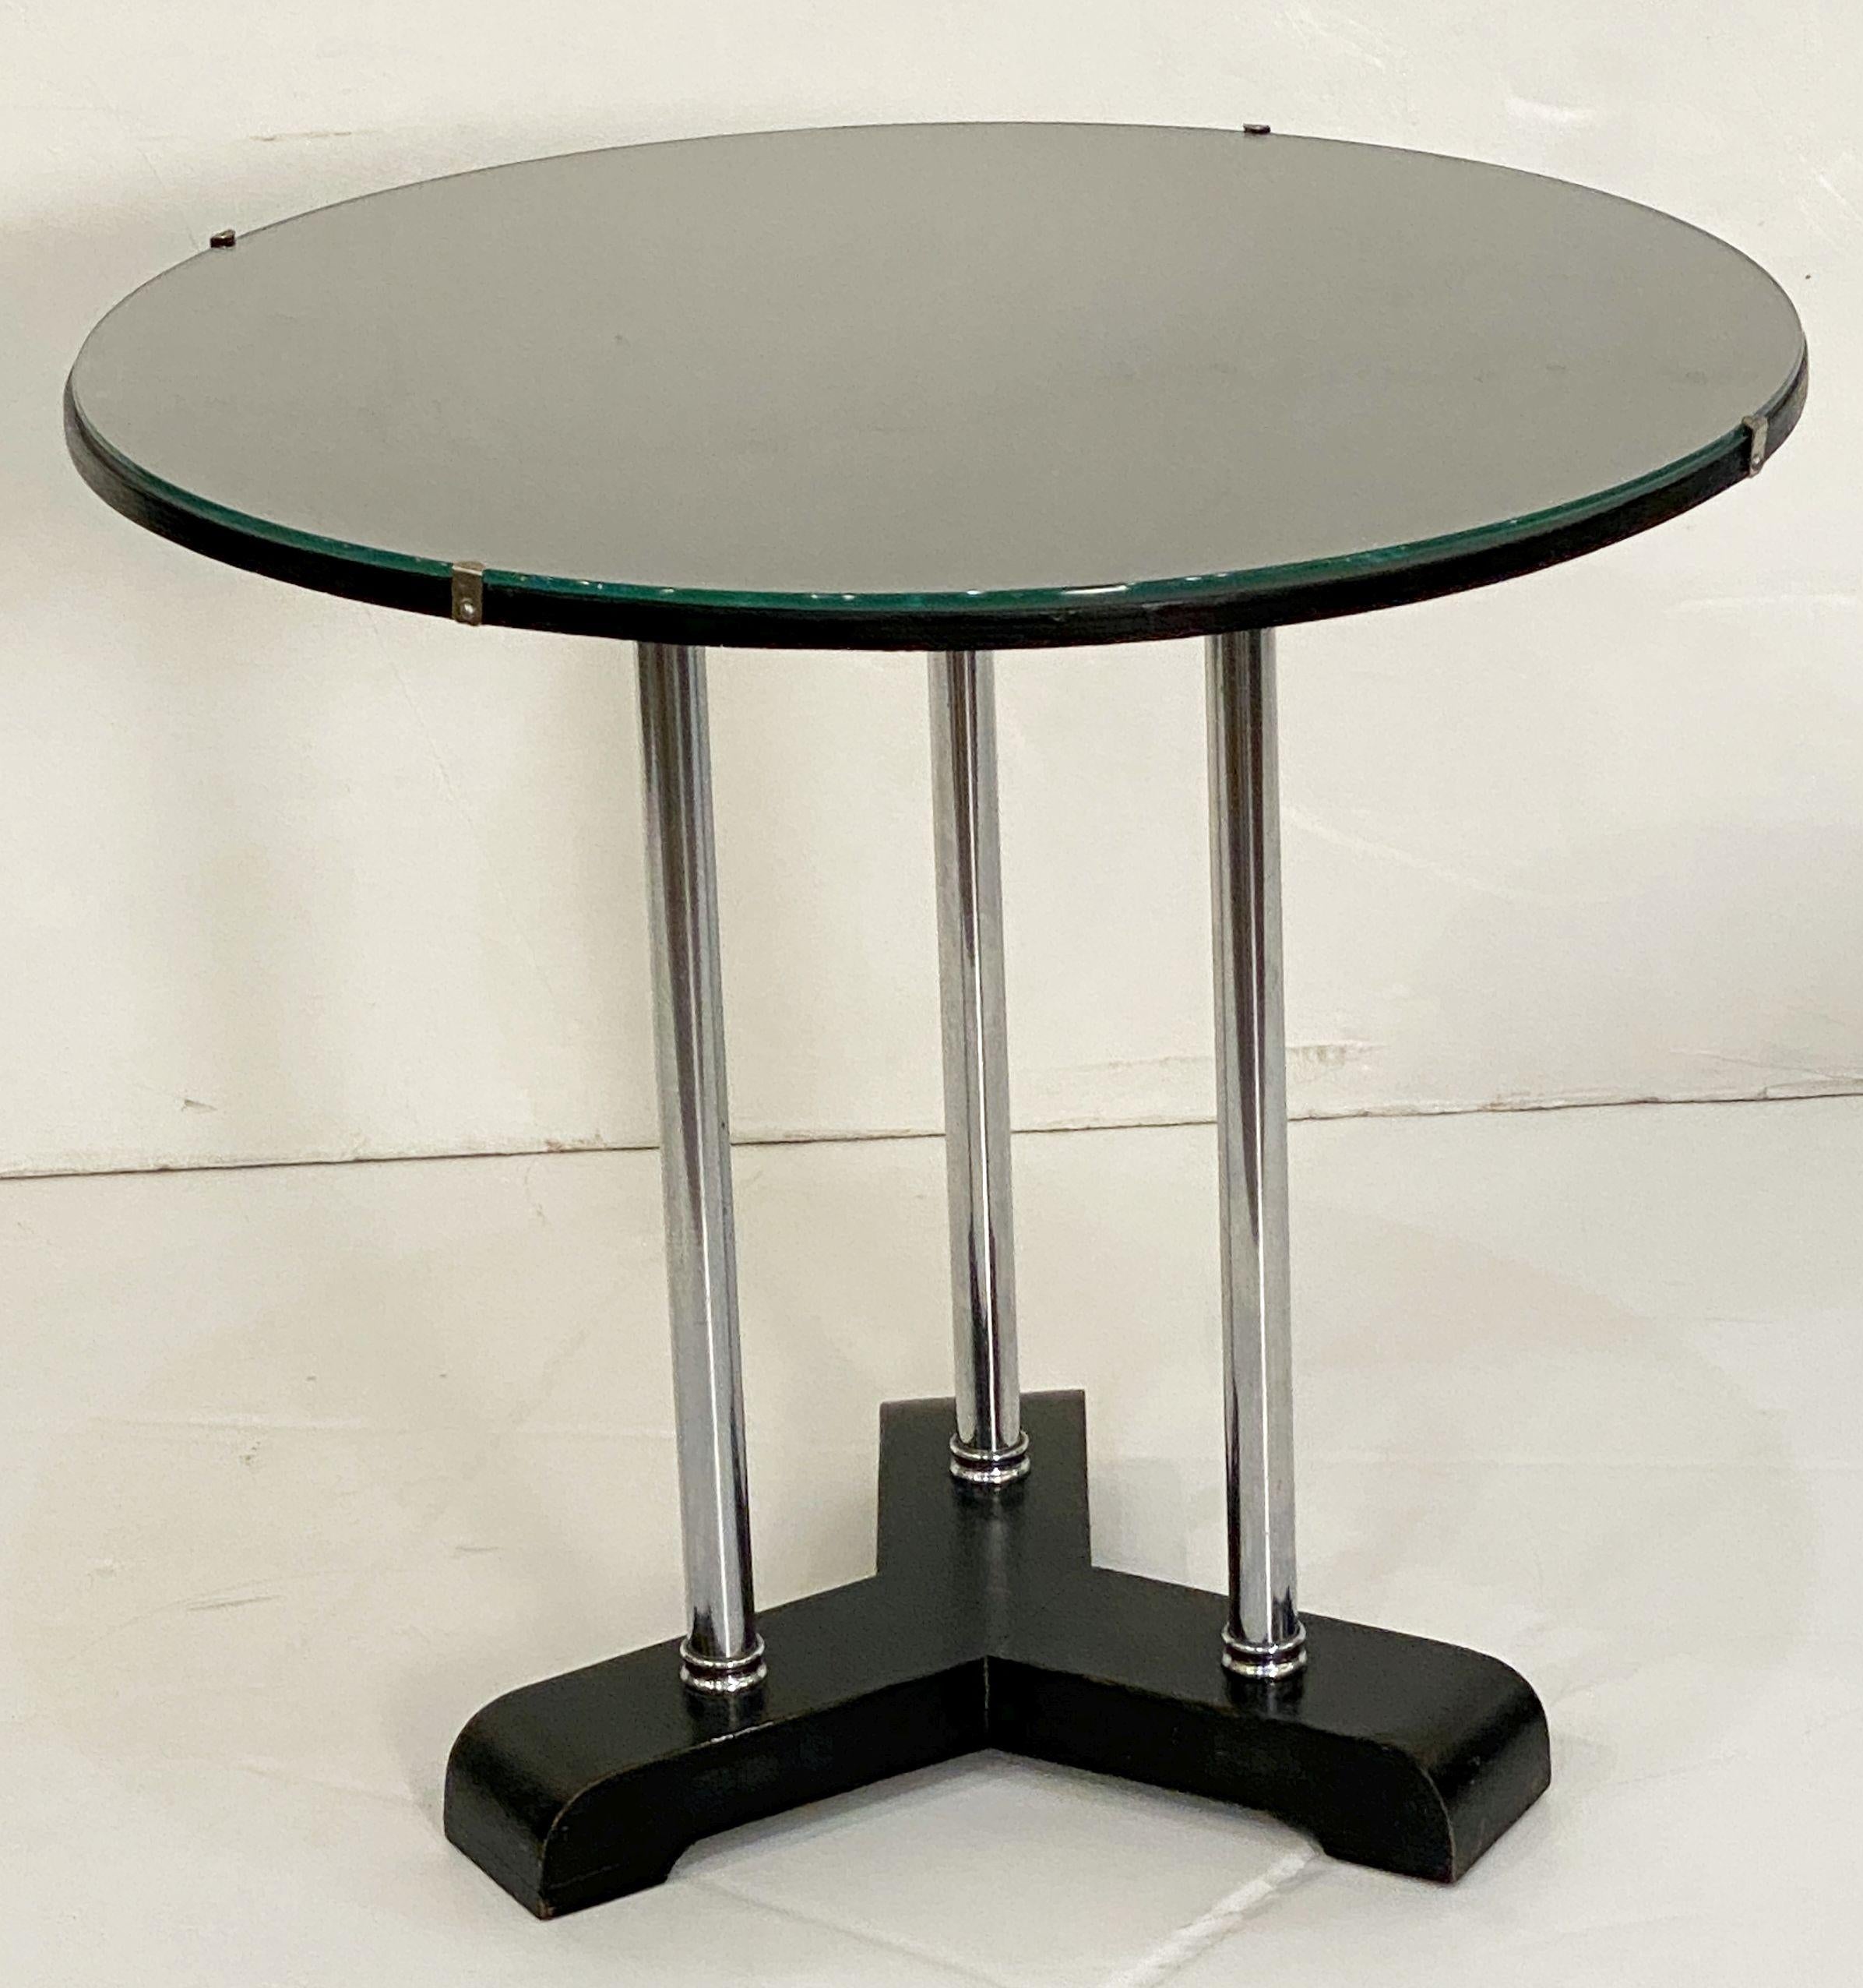 English Art Deco Round Drinks Tripod Table of Chrome, Ebonized Wood, and Glass For Sale 1